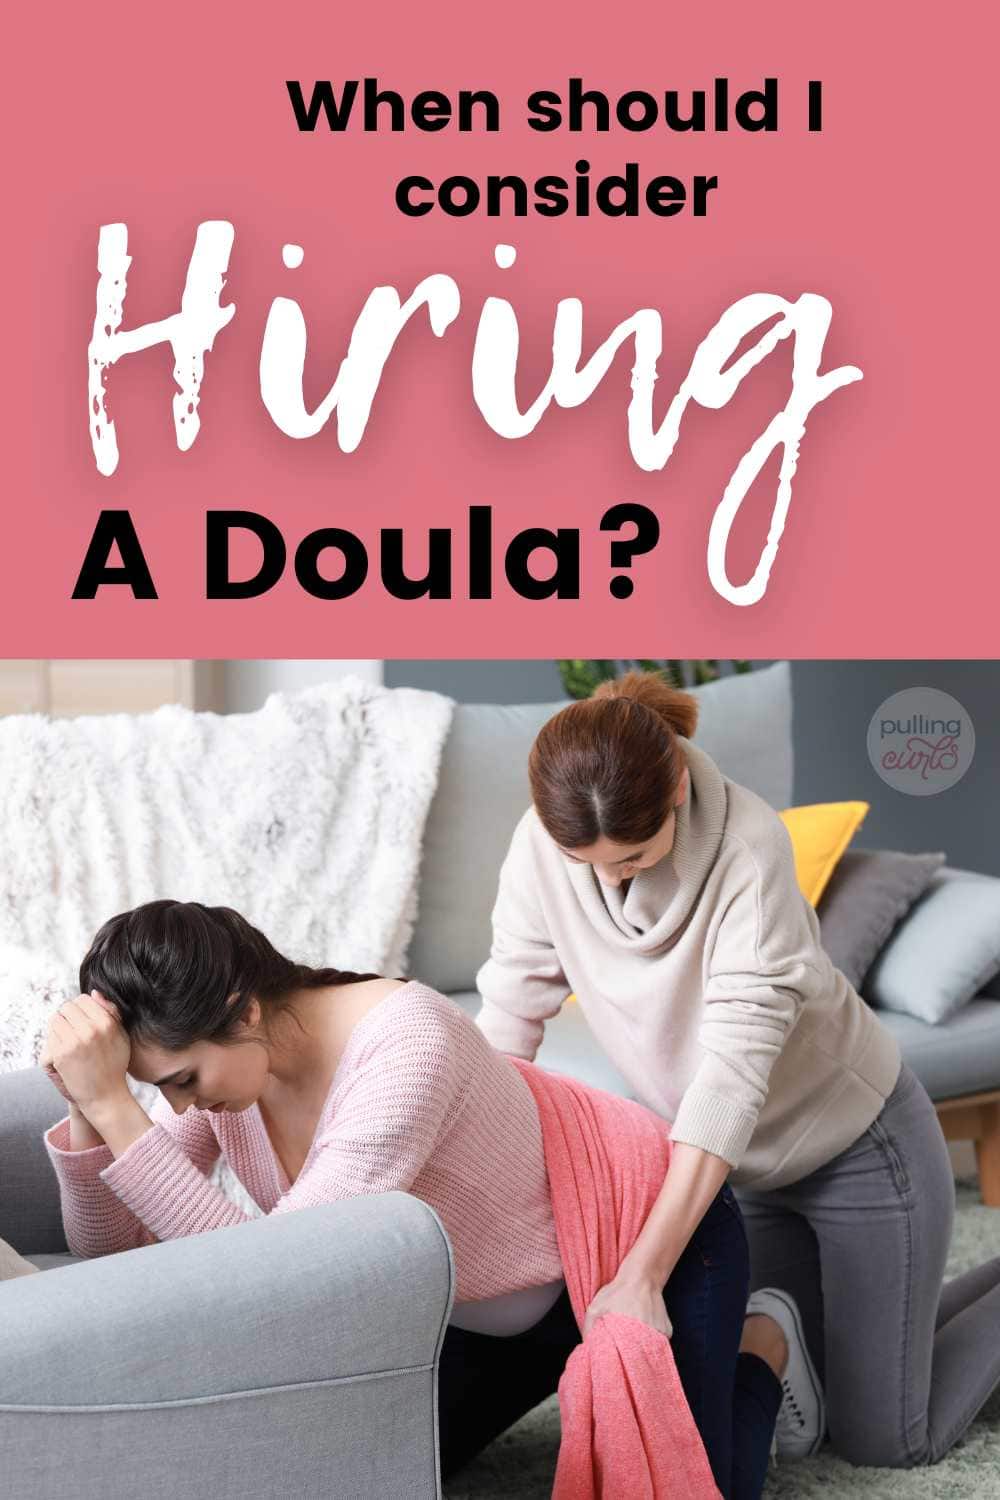 Discover the empowering journey of childbirth with the right guidance. 'Unlocking Childbirth Confidence: When and Why to Hire a Doula', a pin that unravels the mysteries of doula support. Learn when to hire, why it's important, and how a doula can foster a positive birth experience. Let's embrace motherhood confidently! via @pullingcurls